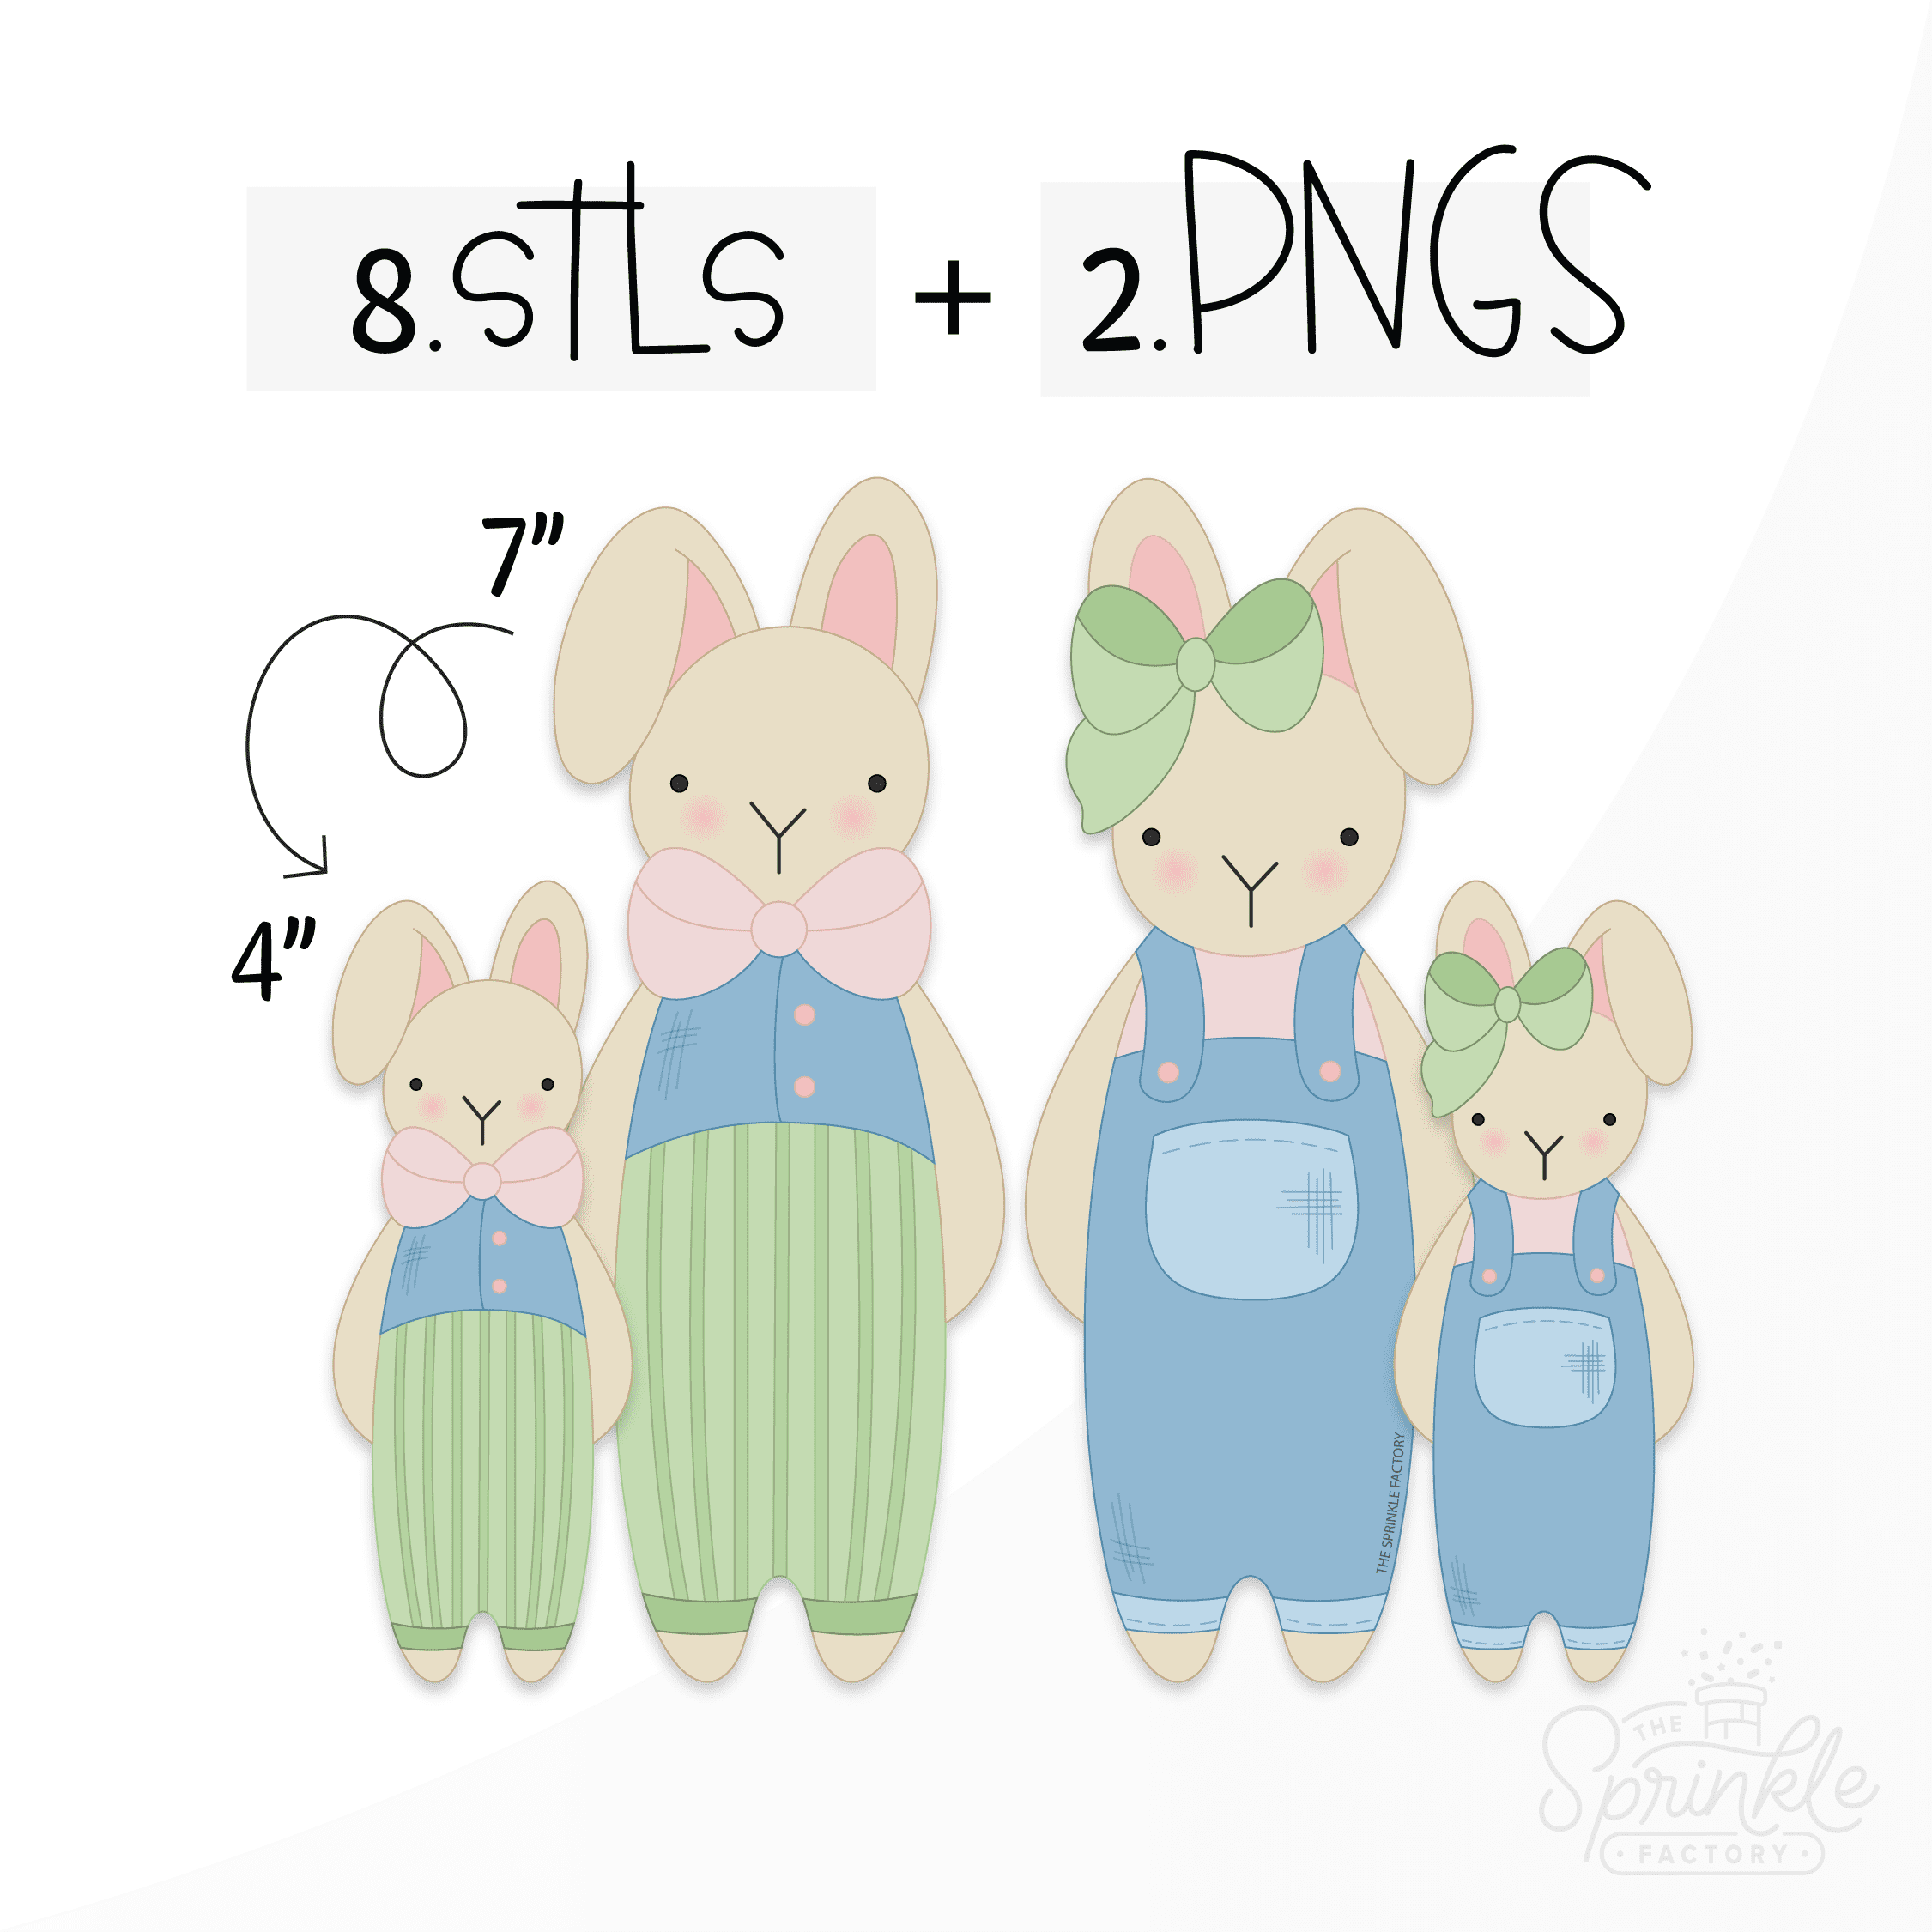 Clipart of a tall brother and sister bunny both with tan fur. Brother has on a blue shirt, pink bow tie and green stripped pants. The sister is wearing green overalls, pink shirt and a green bow on her ear with smaller version of each standing beside them.